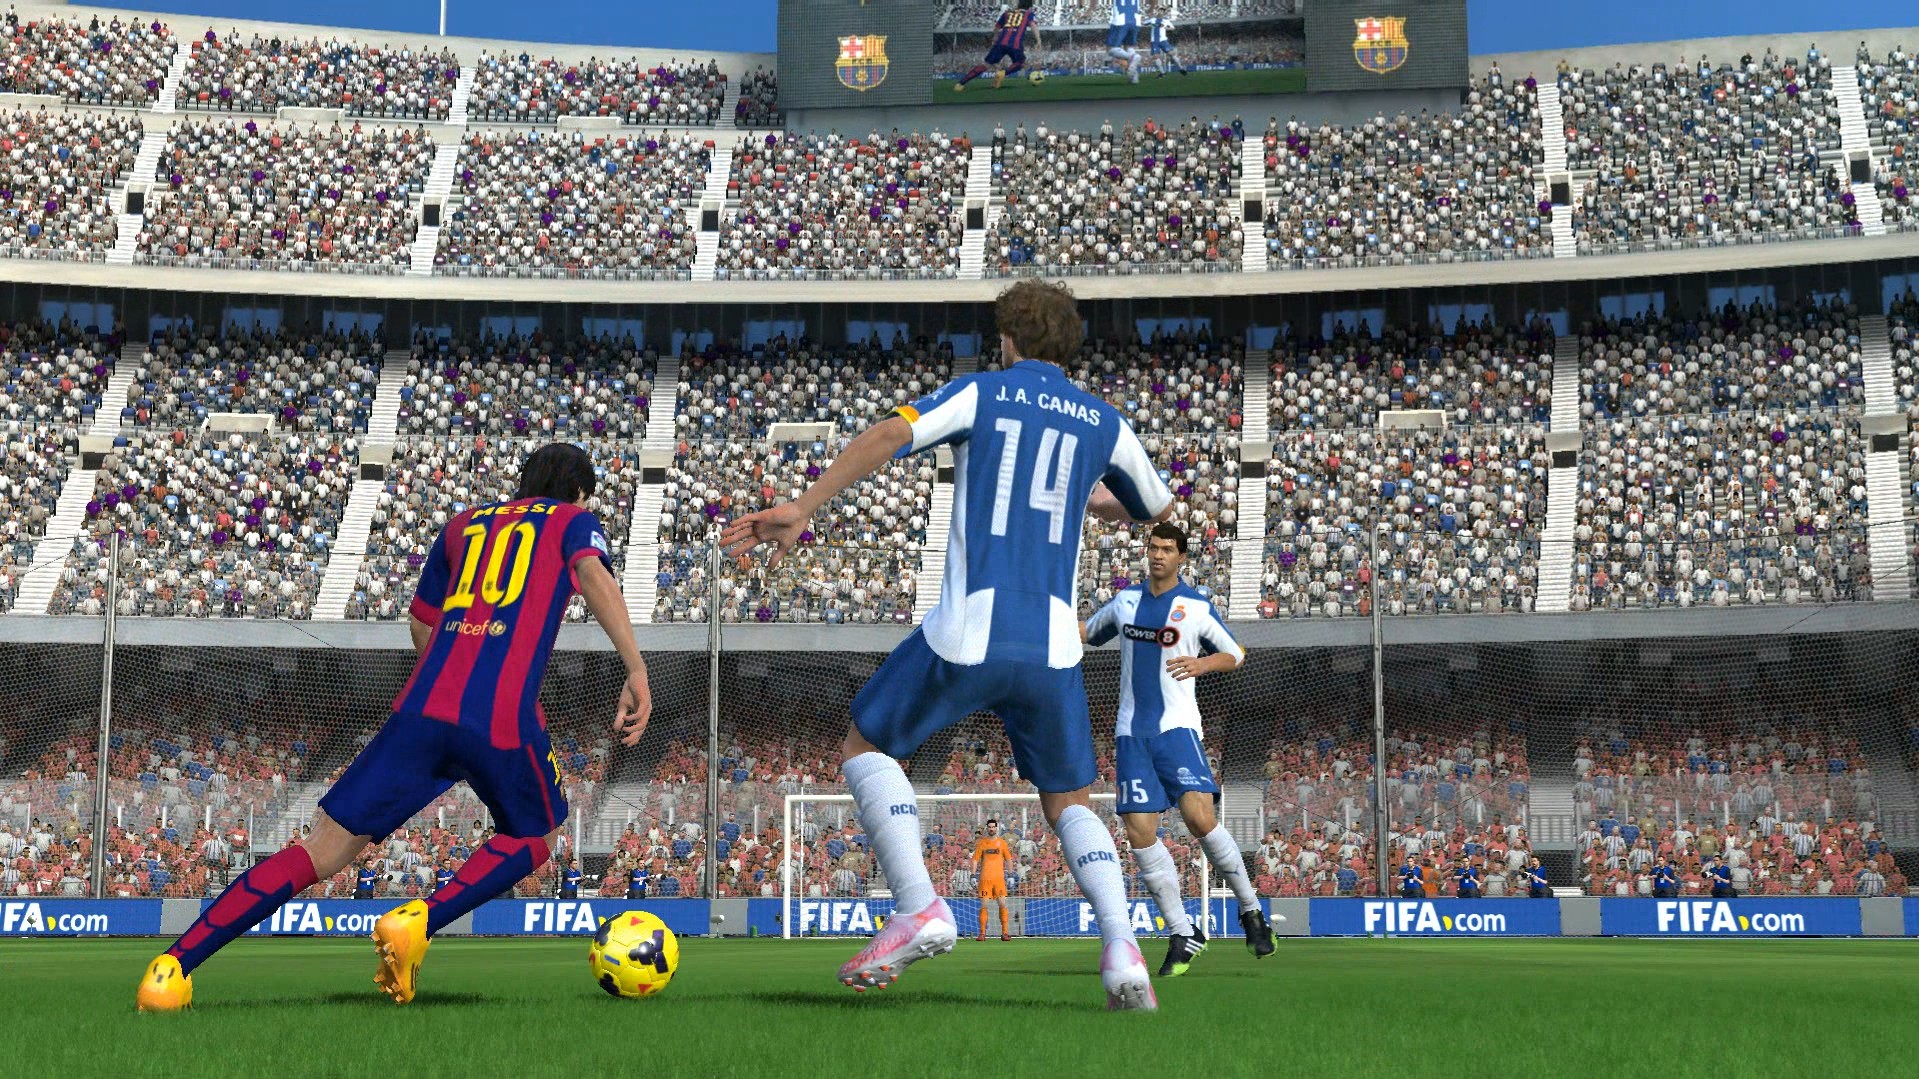 https://img-cdn.2game.vn/pictures/images/2015/8/4/messi_fo3_3.jpg